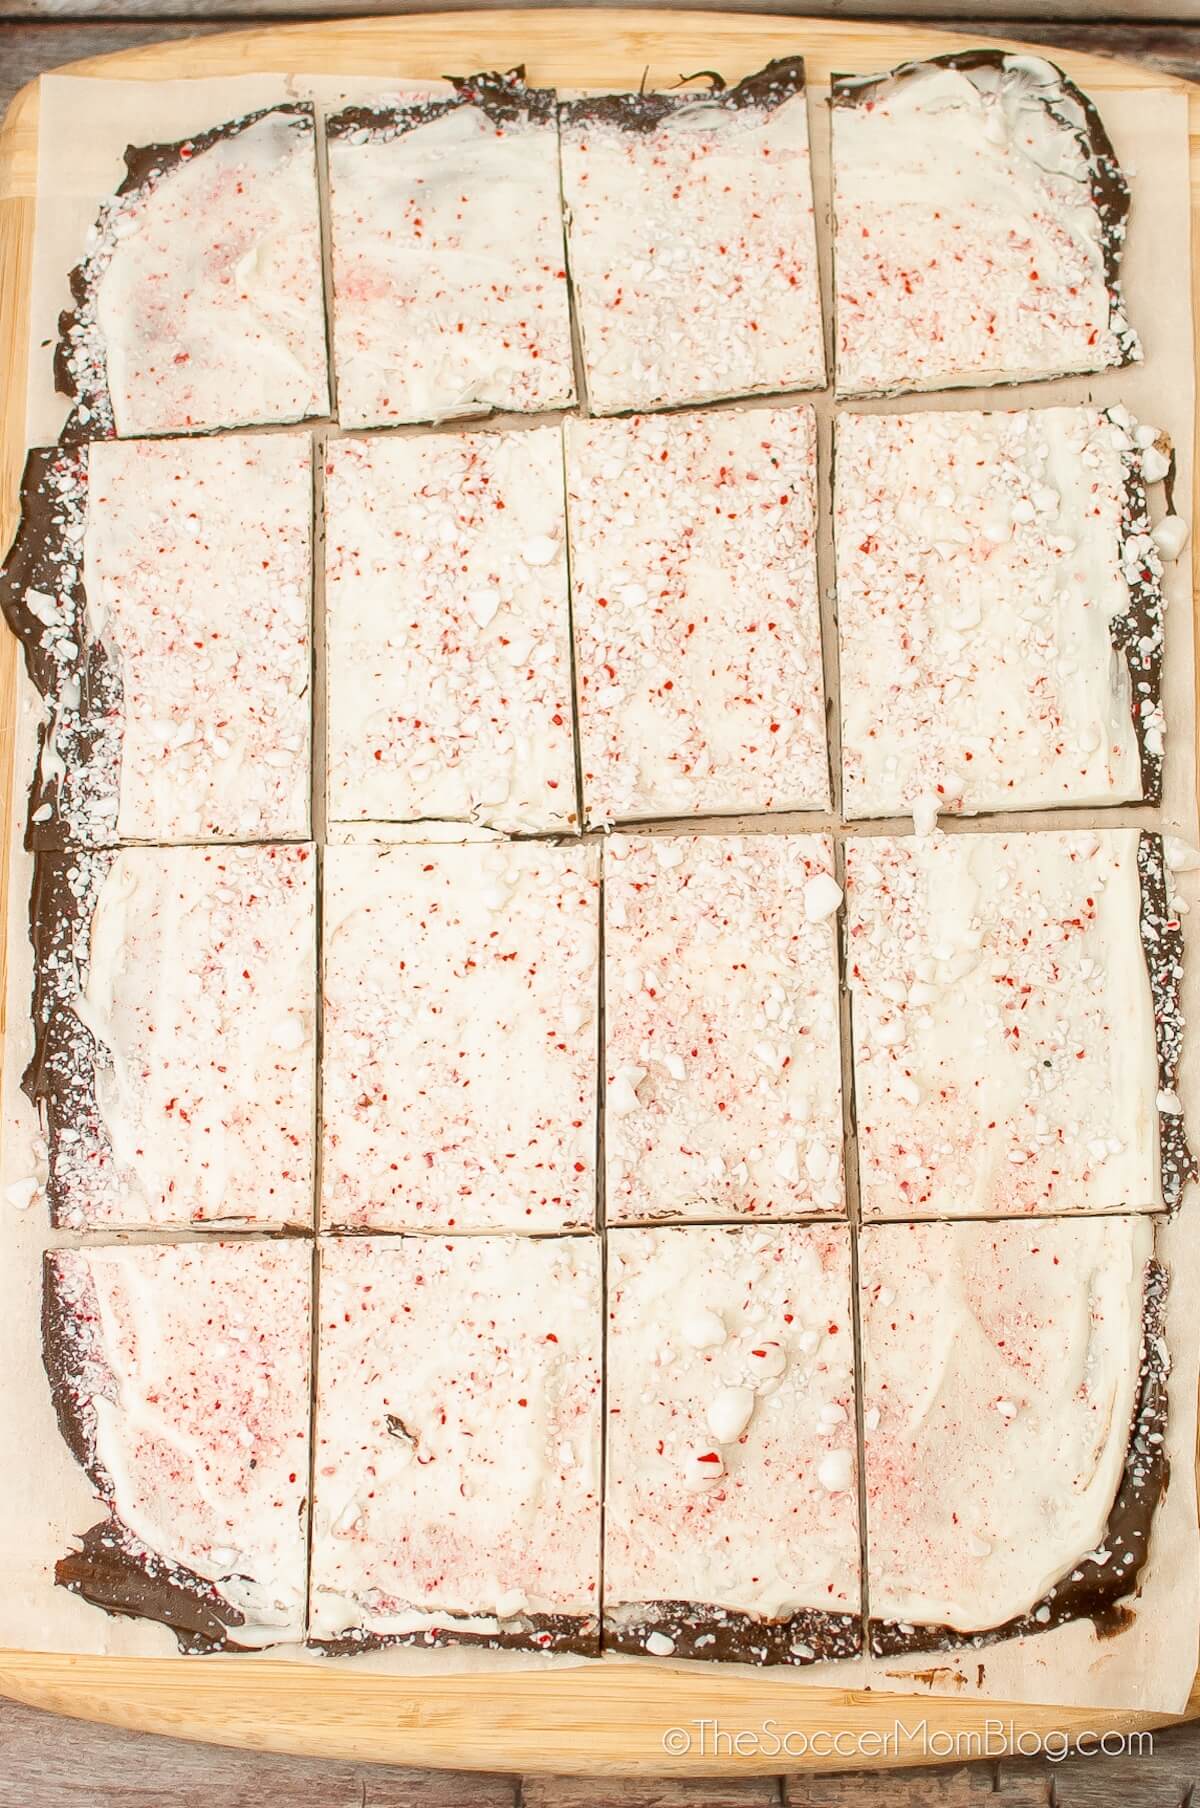 homemade peppermint bark on baking sheet, cut into squares.